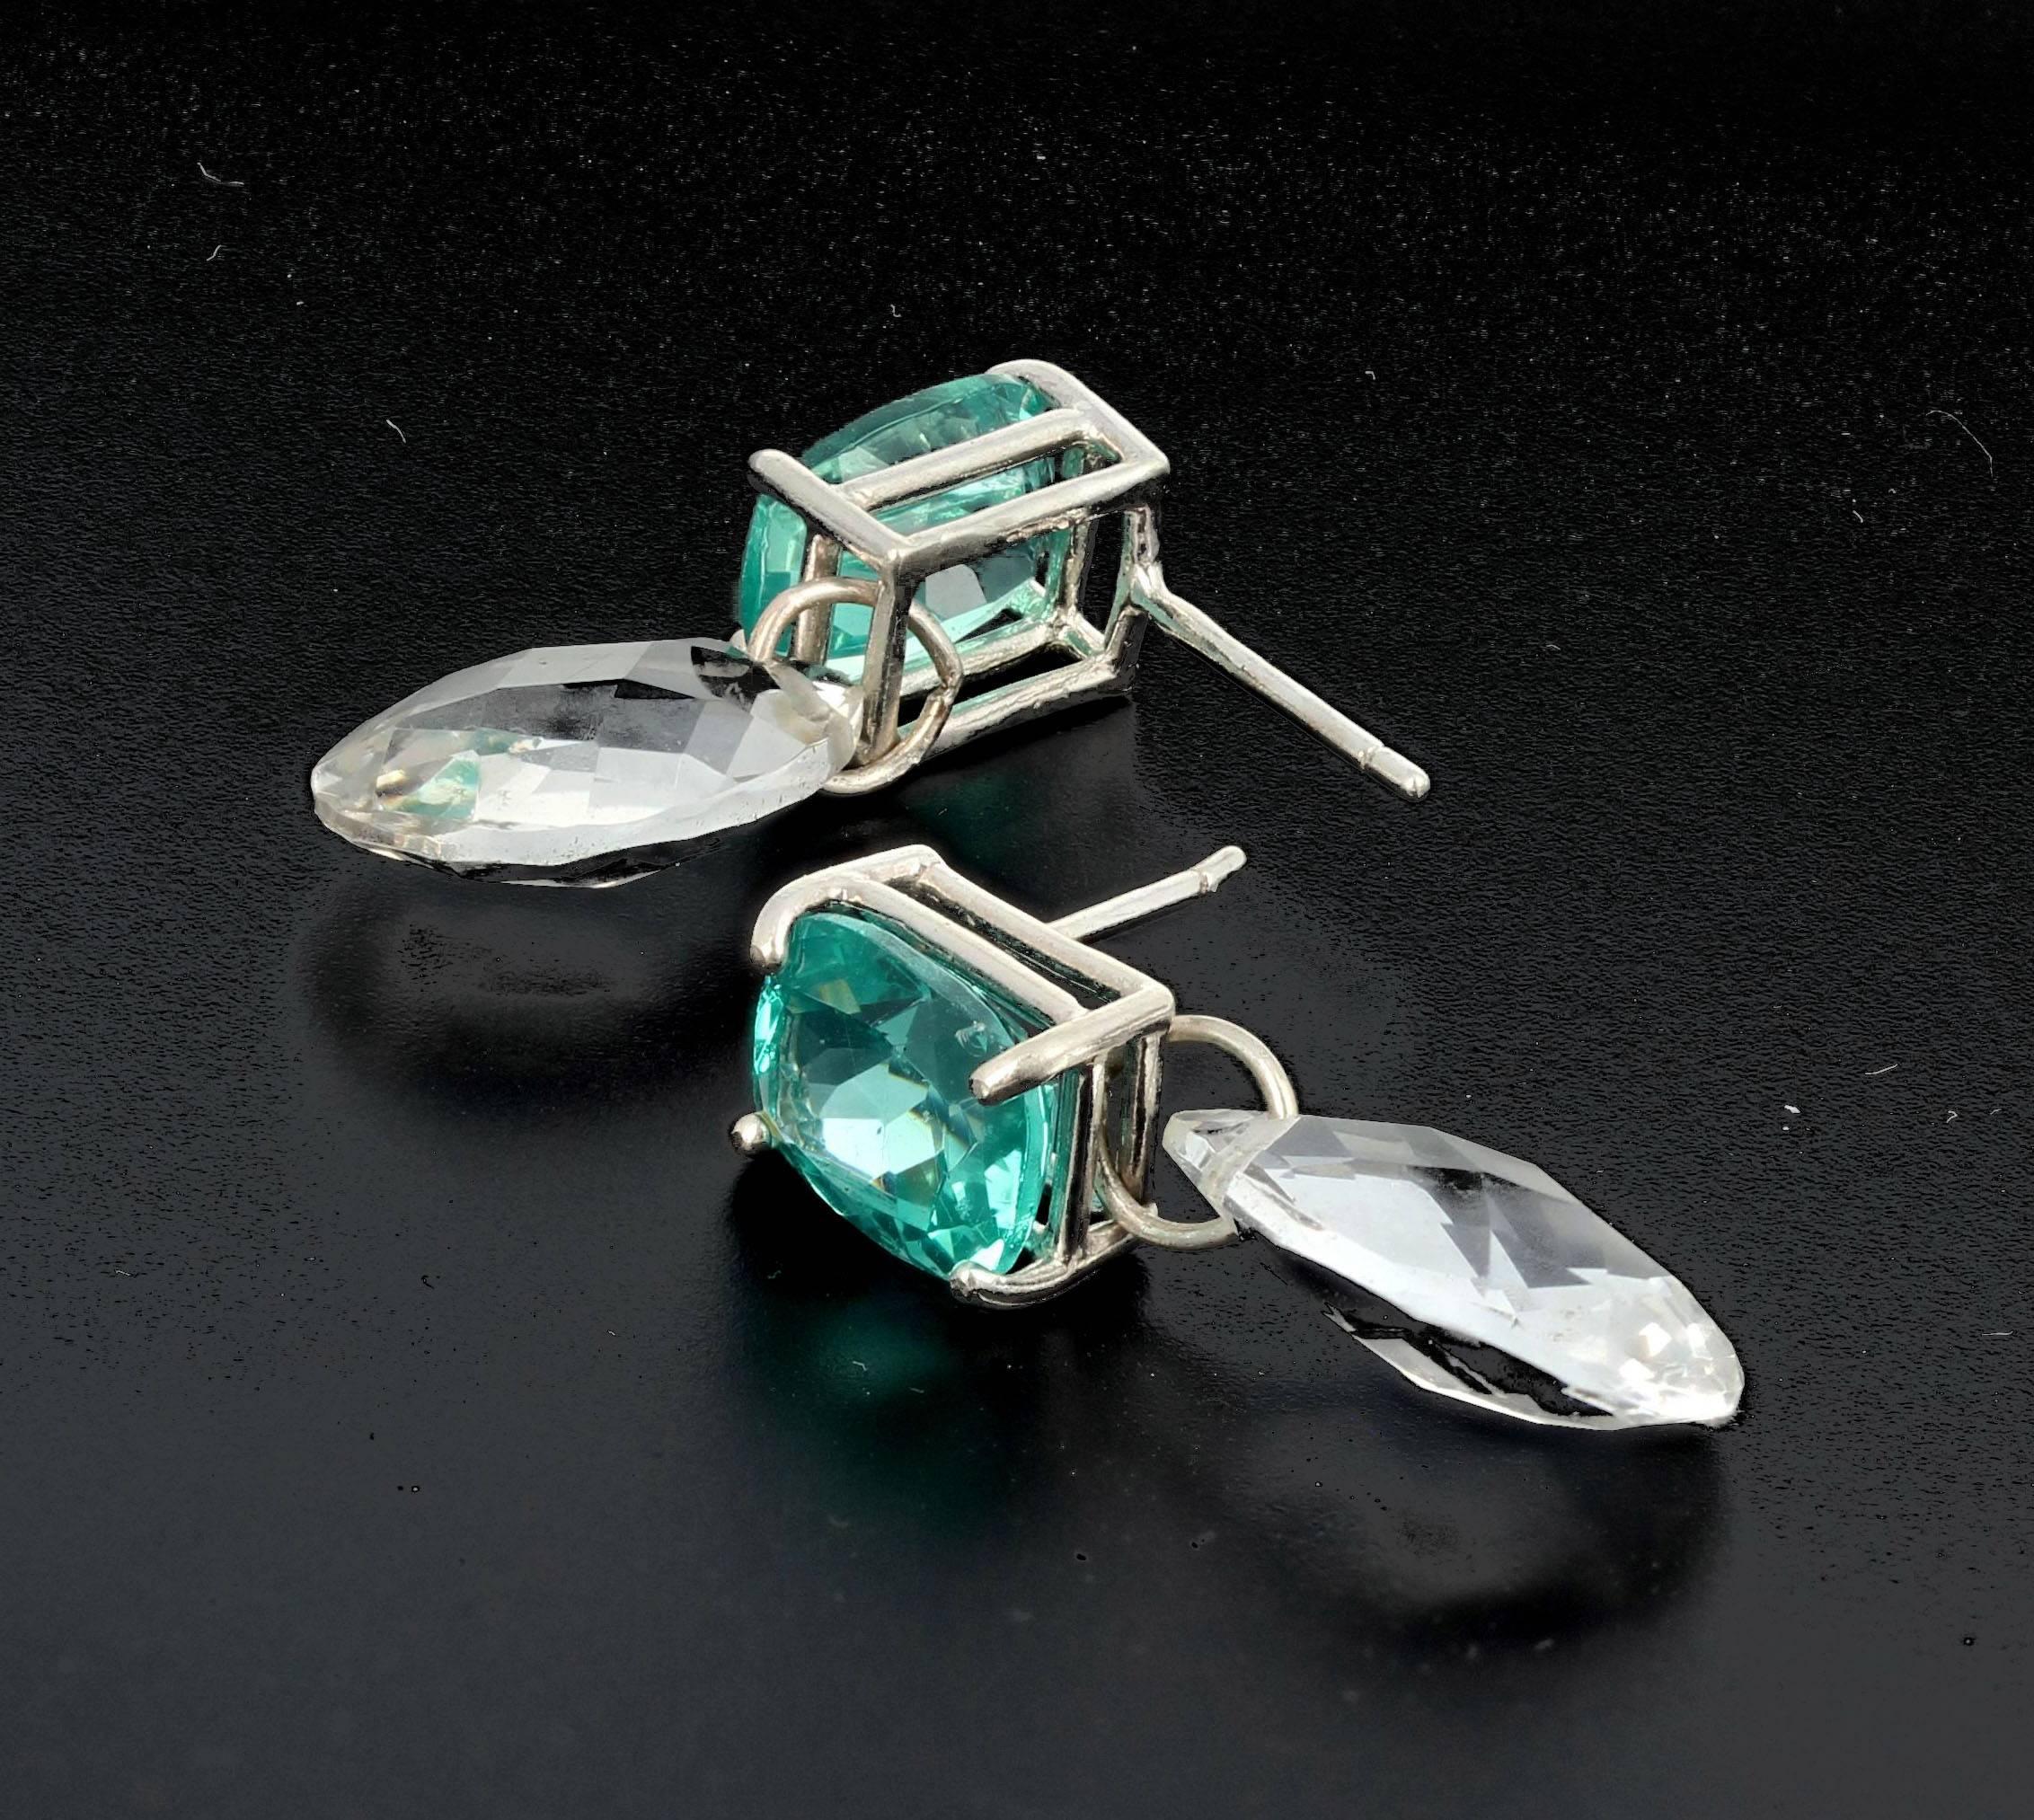 Brilliant 4.75 carats of unique natural Apatite elegantly dangle 8.75 carats of checkerboard gem cut sparkling white Topaz on sterling handmade silver stud earrings.  They hang approximately .94 inches long.   More from this seller by putting